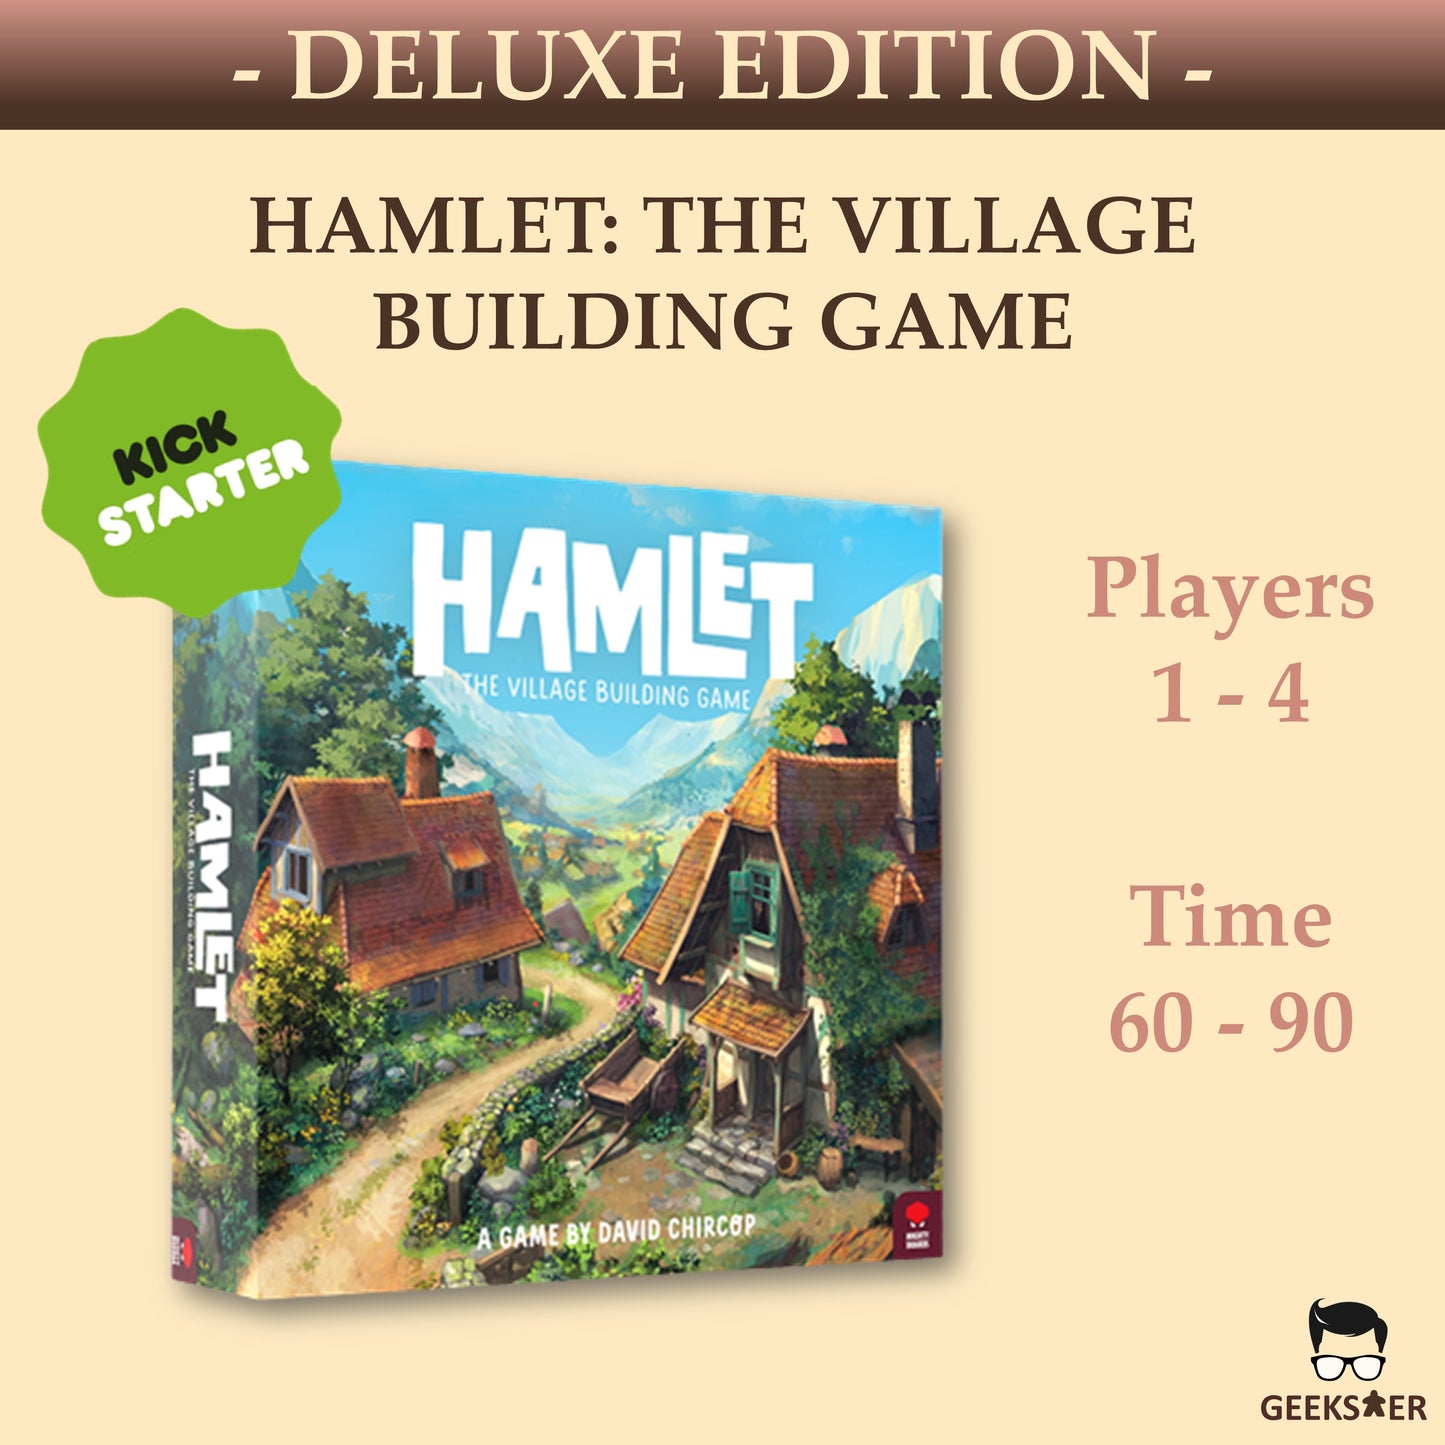 Hamlet: The Village Building Game - Deluxe Edition